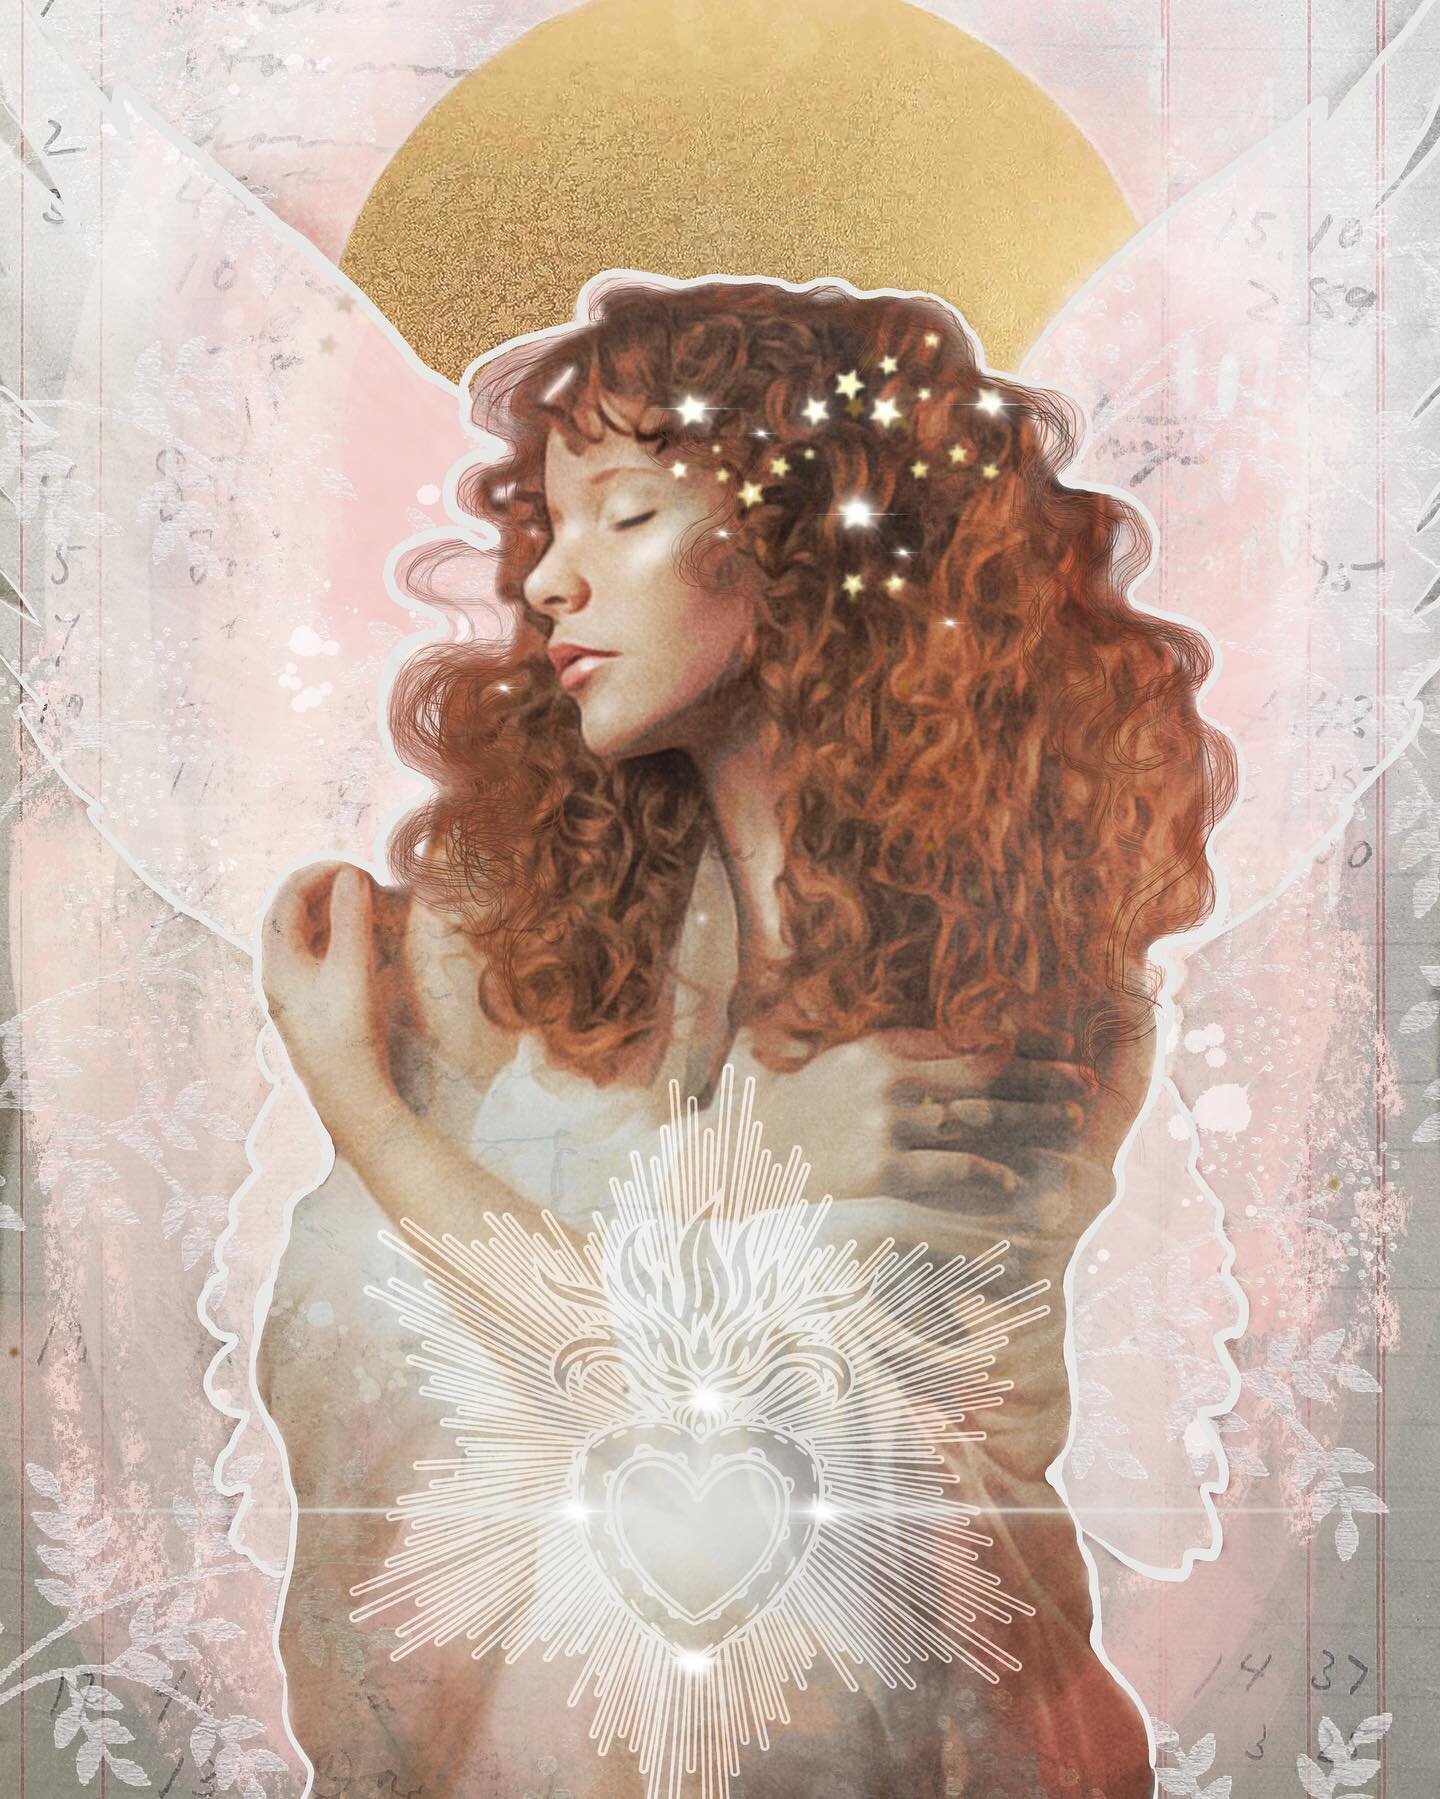 &ldquo;May there always be an Angel by your side.&rdquo;
✨
Just created this Angel card on my iPad using Procreate. I absolutely loved composing this image. We will be learning more about Archangel Chamuel this month in the Studioworks Journal since 